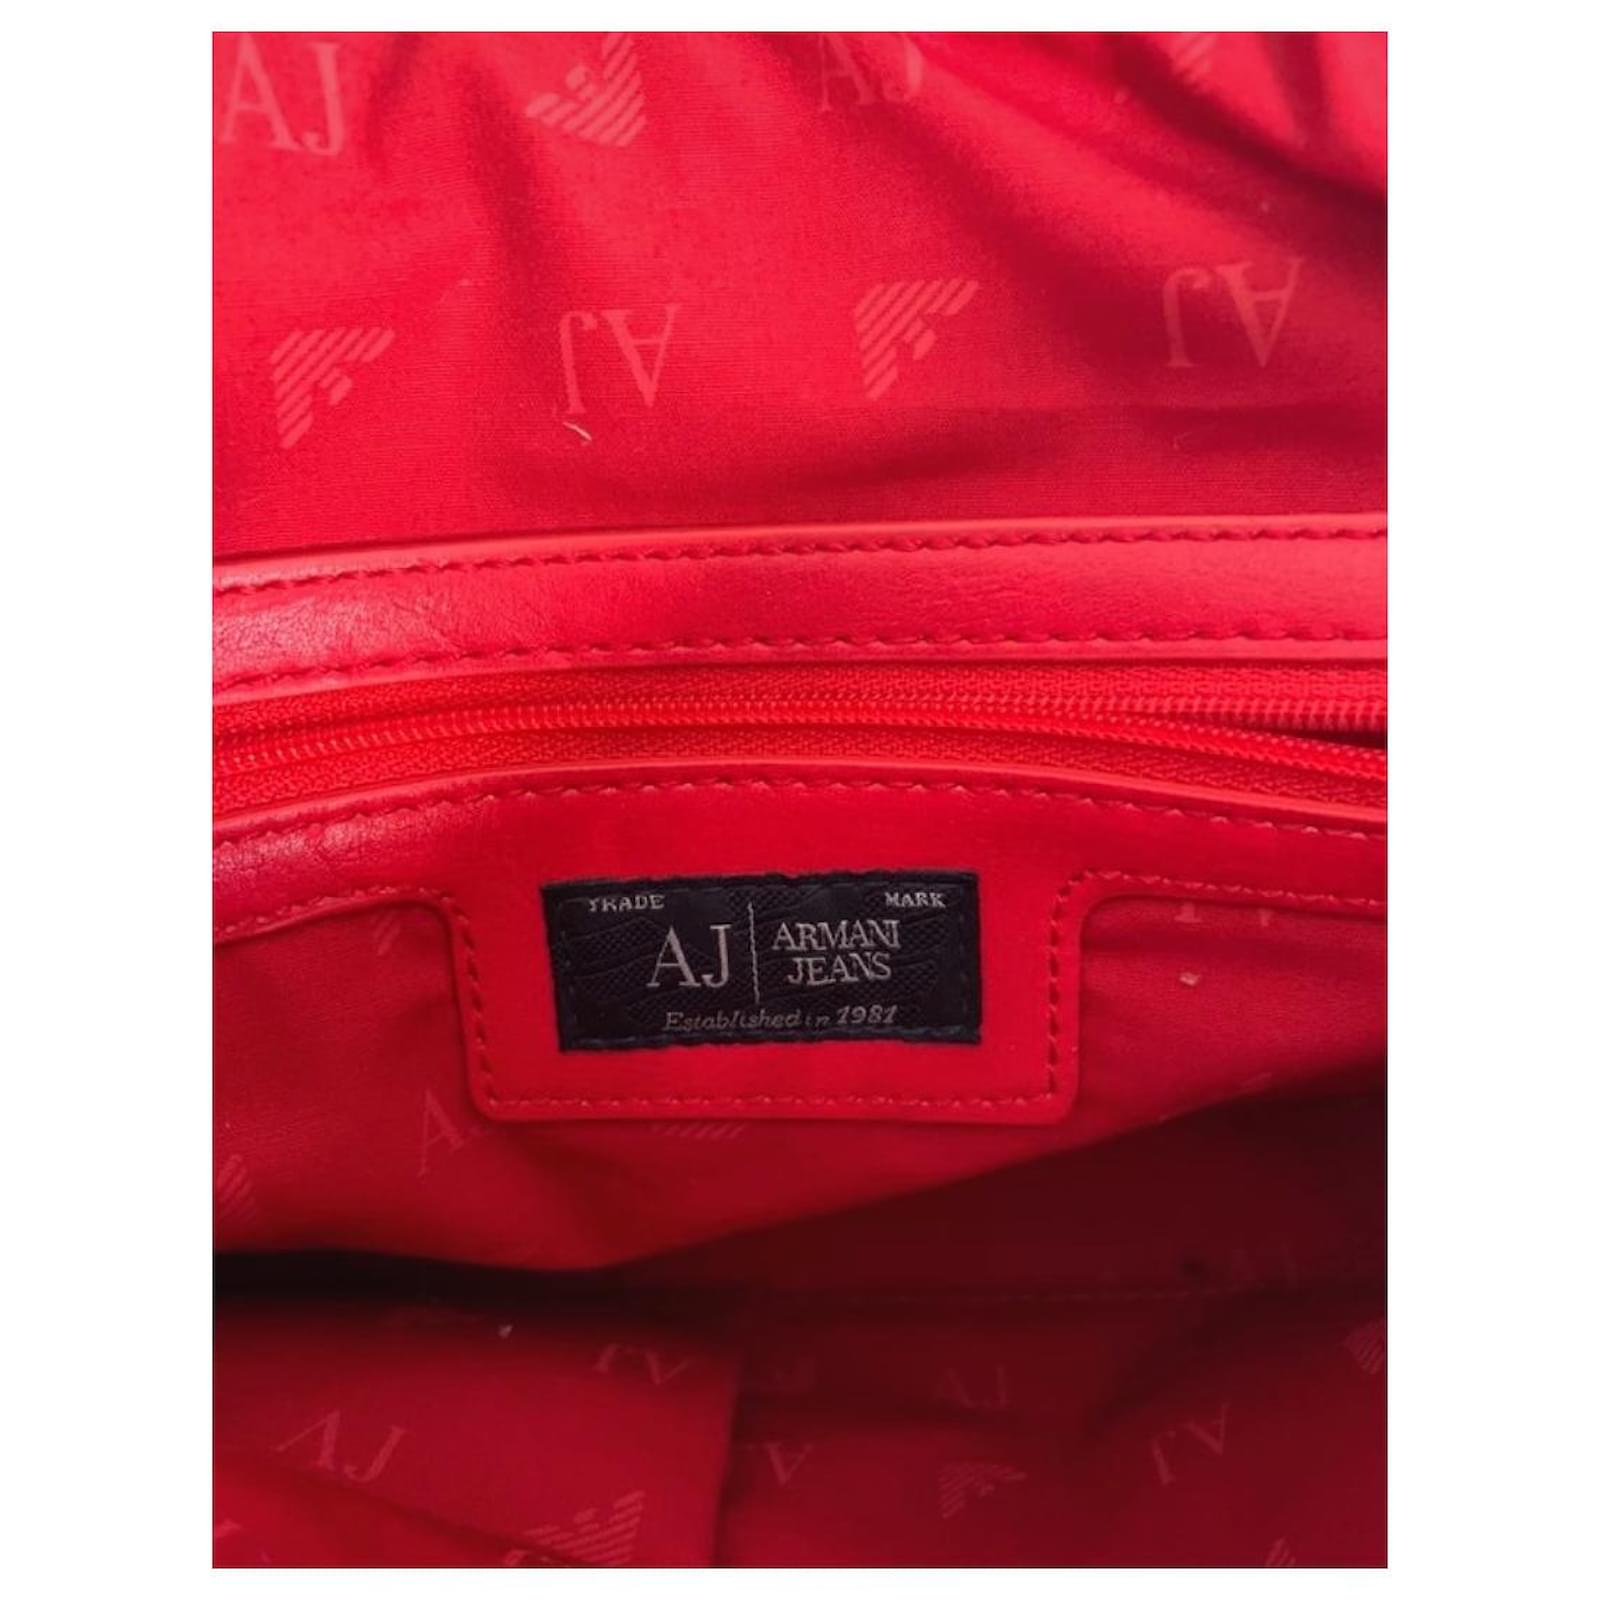 Armani Jeans red tote OK condition, scratches... - Depop